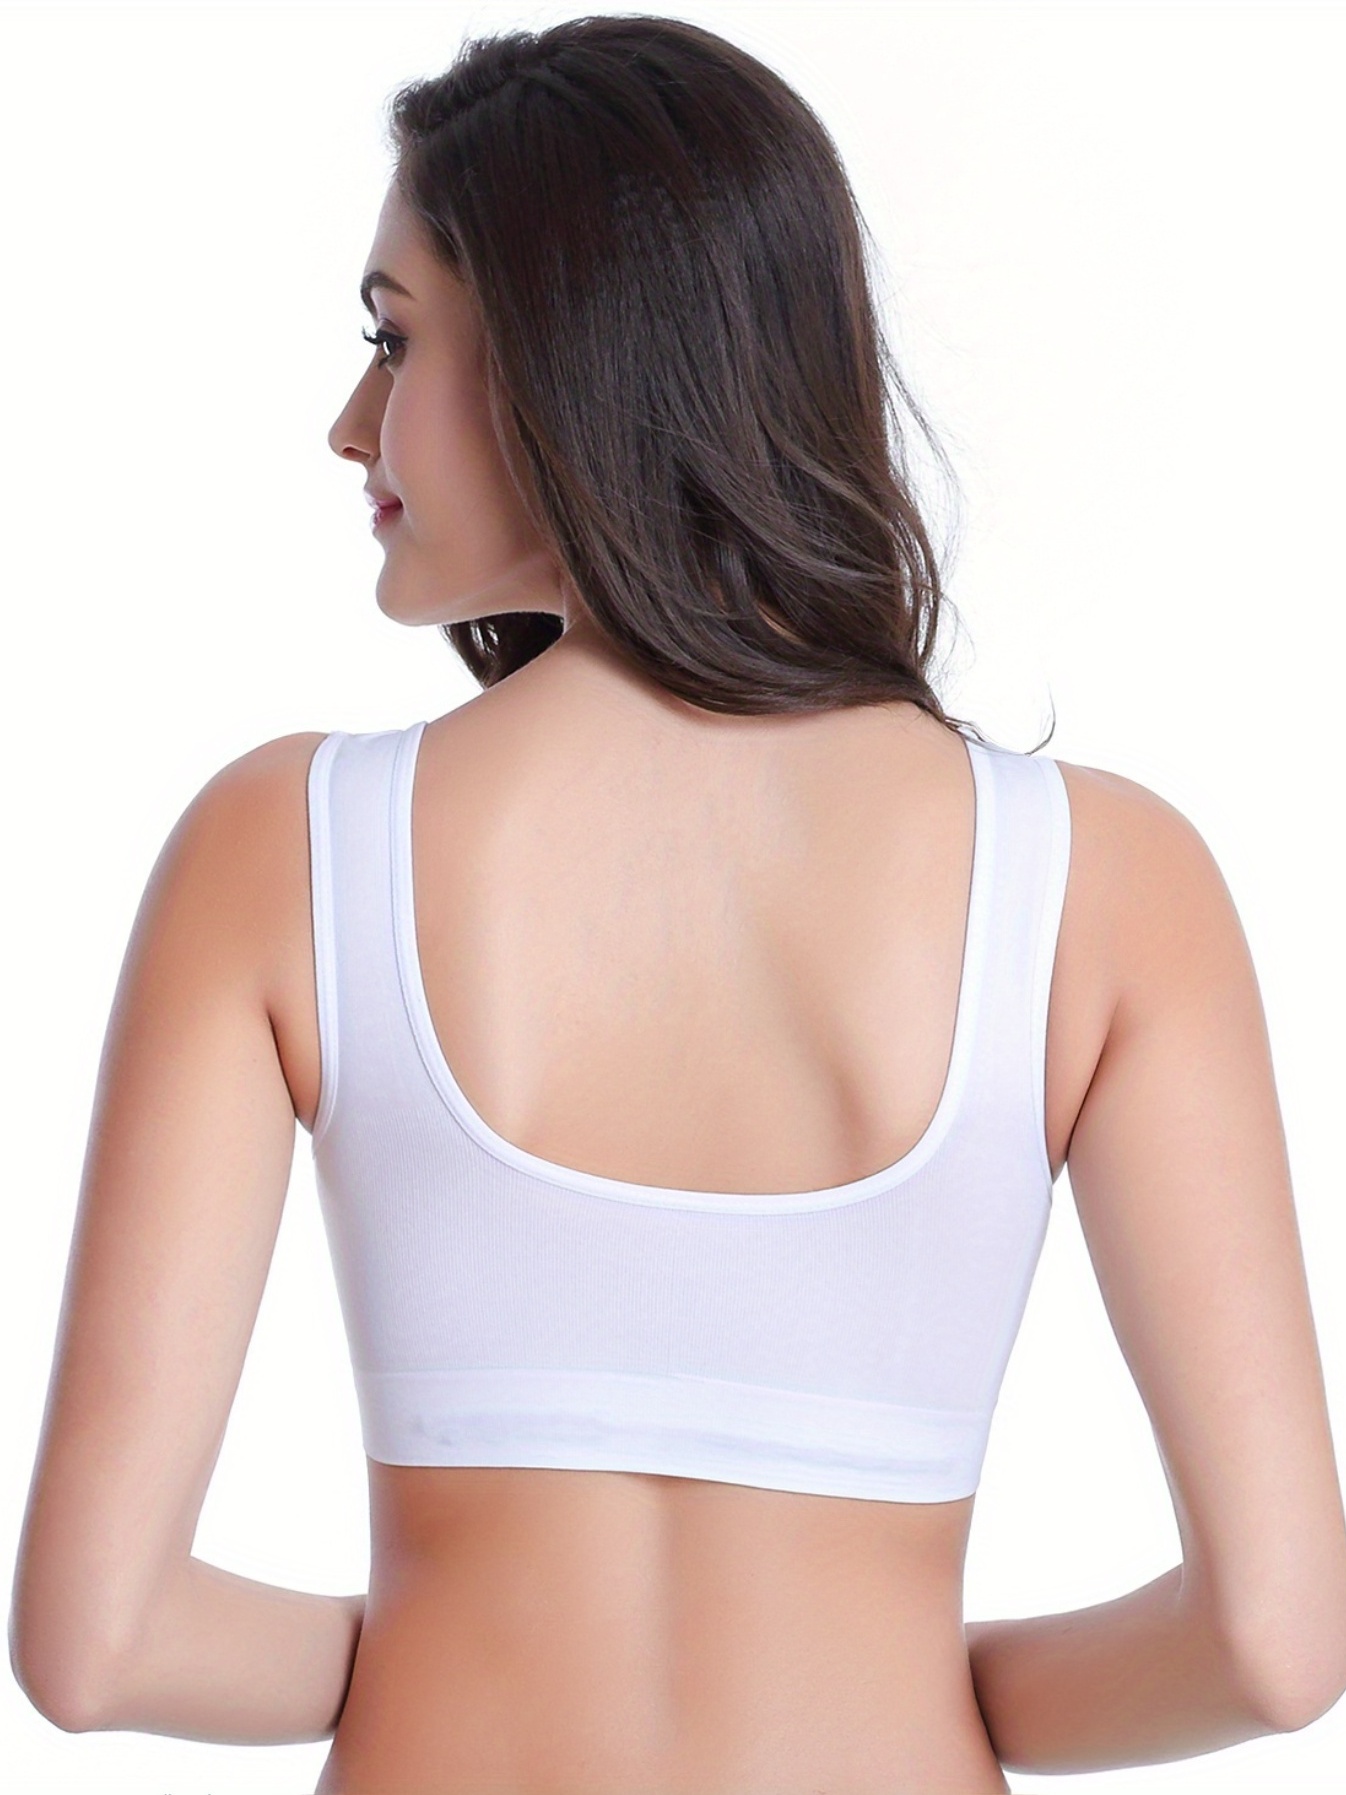 Sports Bras for Women - 3 Pack Ribbed Wireless Soft Workout Tops Padded  Bralettes Racerback Comfort Cami Crop S-XXL